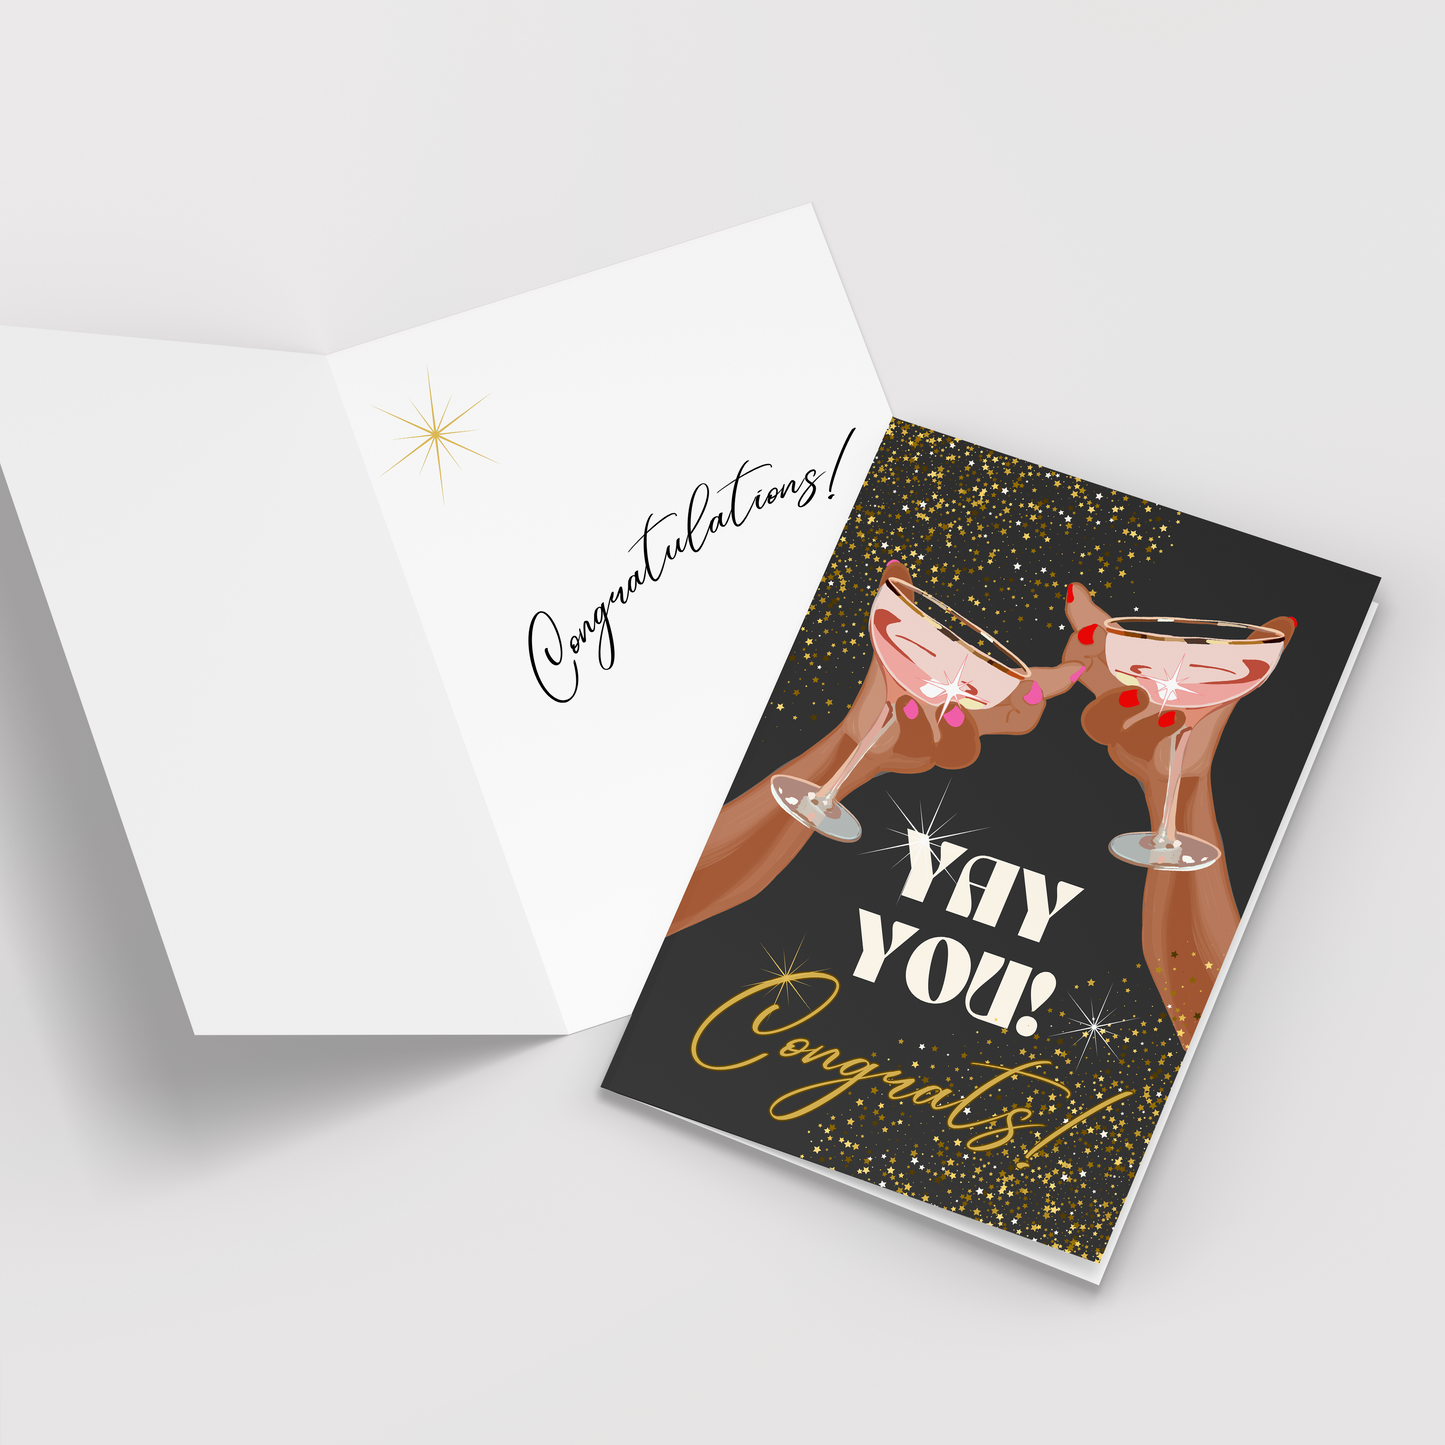 Yay You Cheers Congrats! Greeting card Retro Pack of 10 Greeting Cards (standard envelopes) (US & CA)